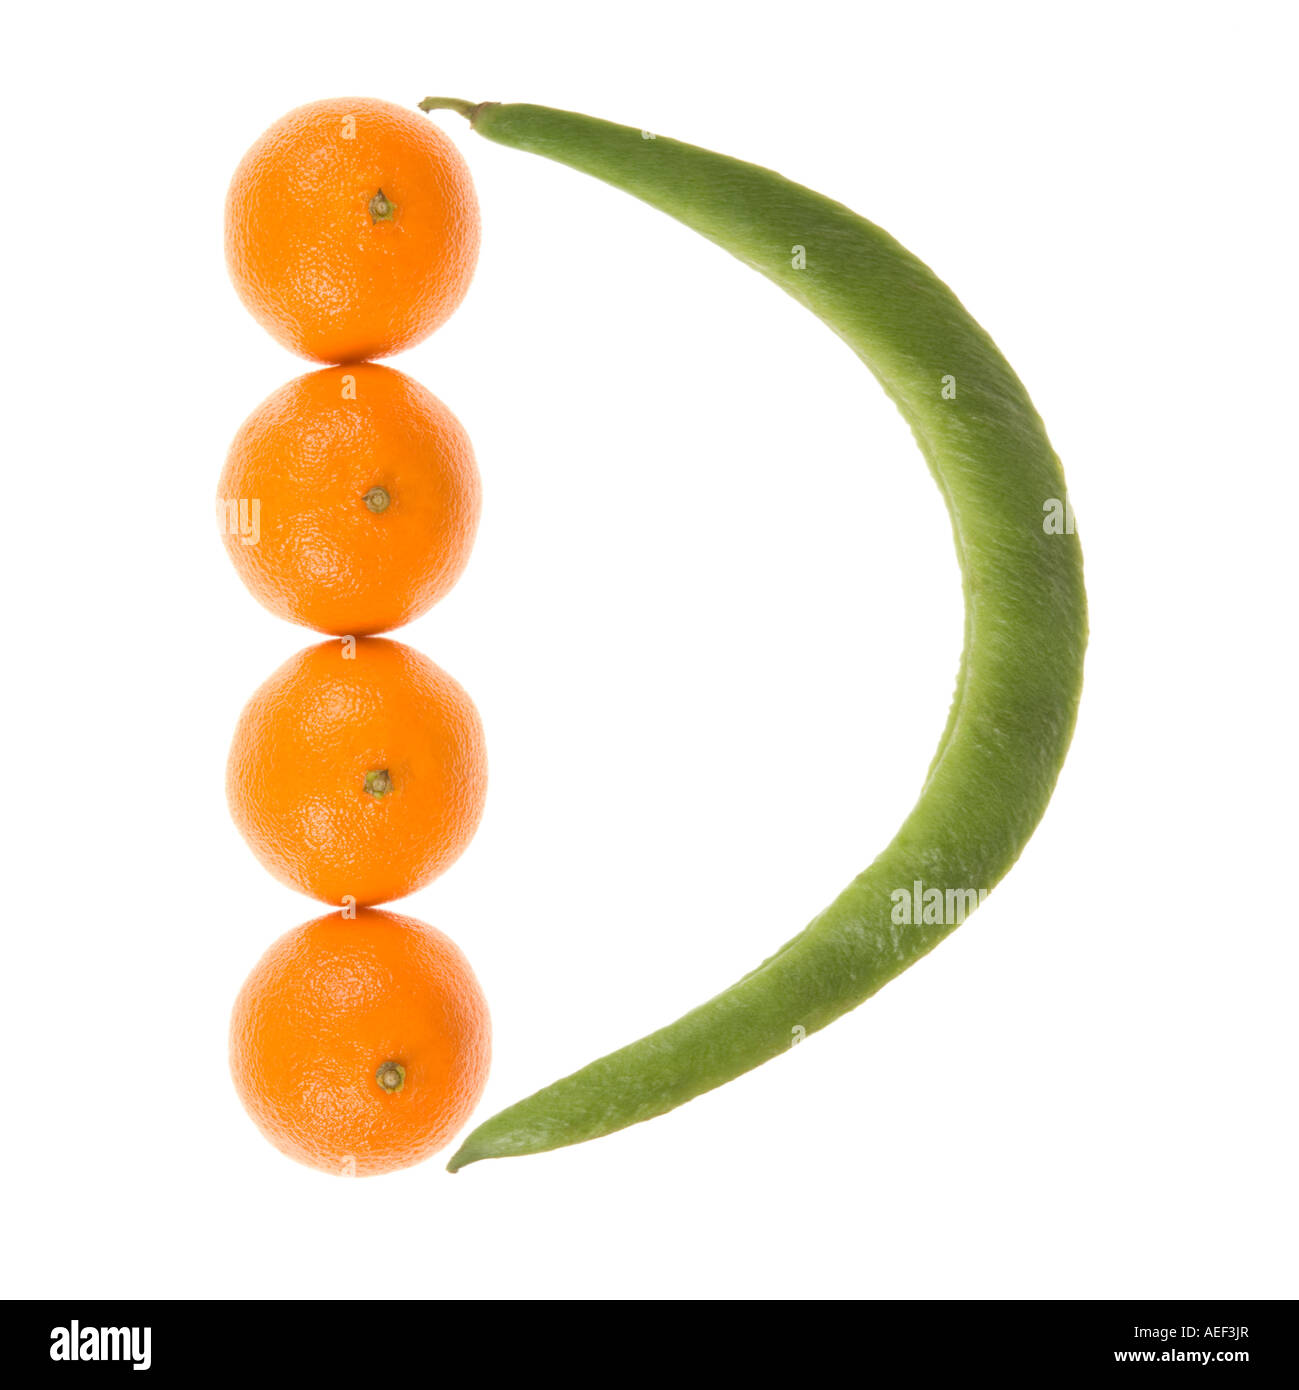 The letter D on a pure white background using oranges and a runner bean. Stock Photo